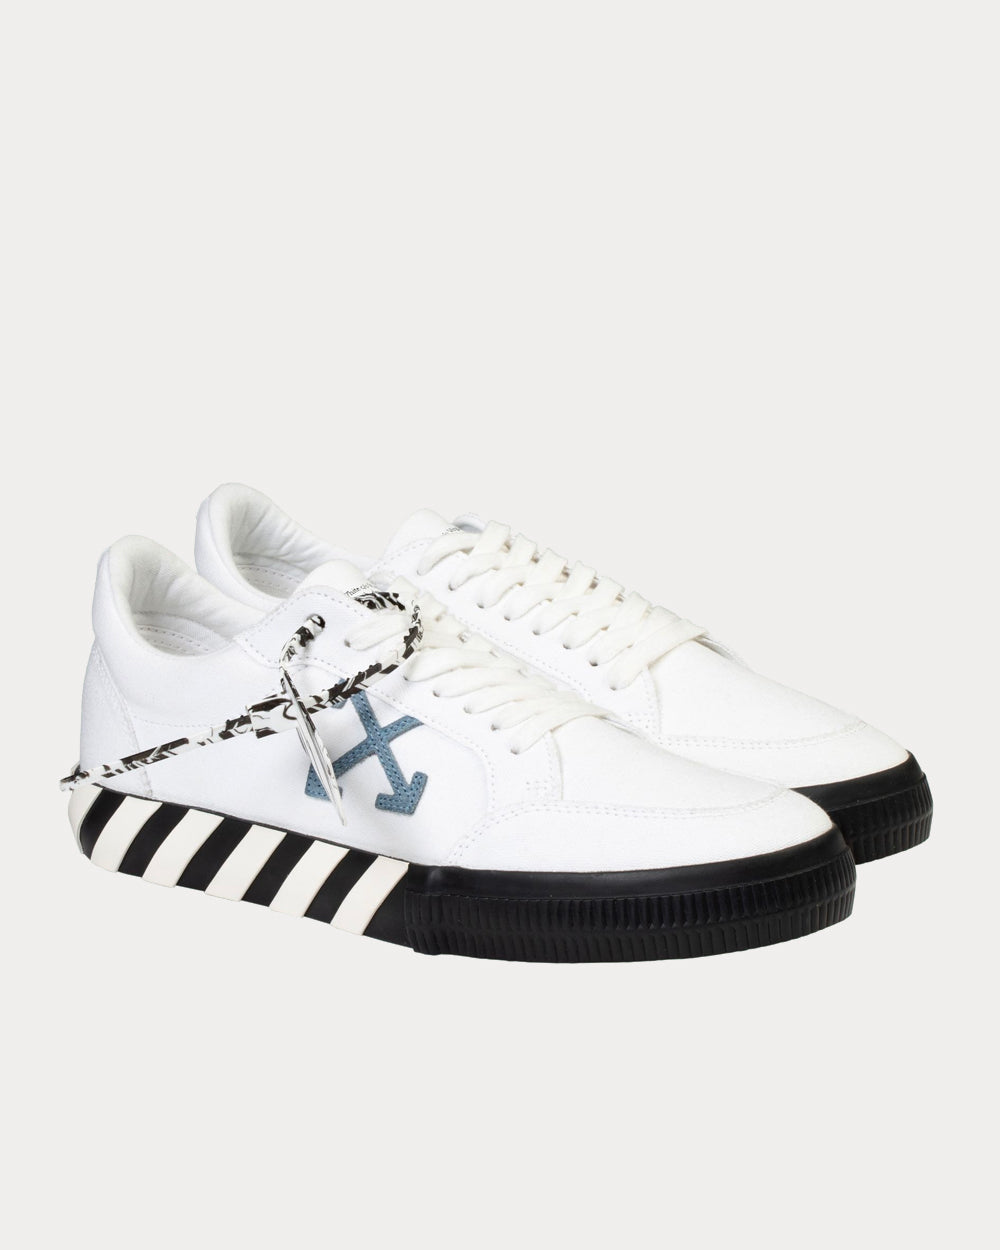 Off-White Vulcanized White / Light Blue Low Top Sneakers - Sneak in Peace